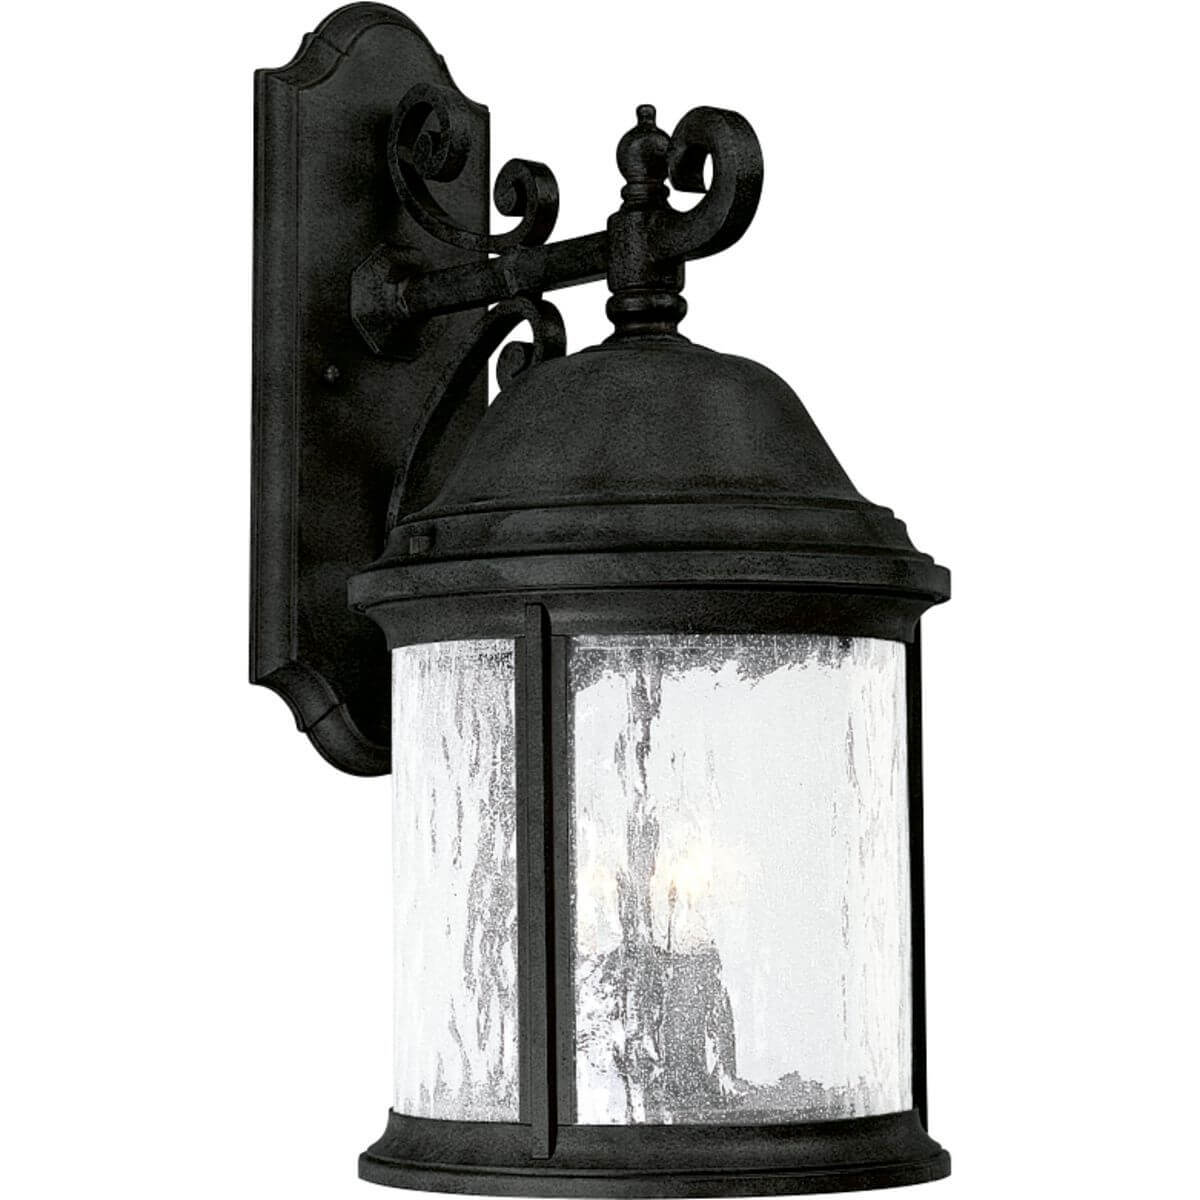 Progress Lighting Ashmore 3 Light 21 inch Tall Outdoor Wall Lantern in Textured Black with Water Seeded Curved Glass Panels P5651-31